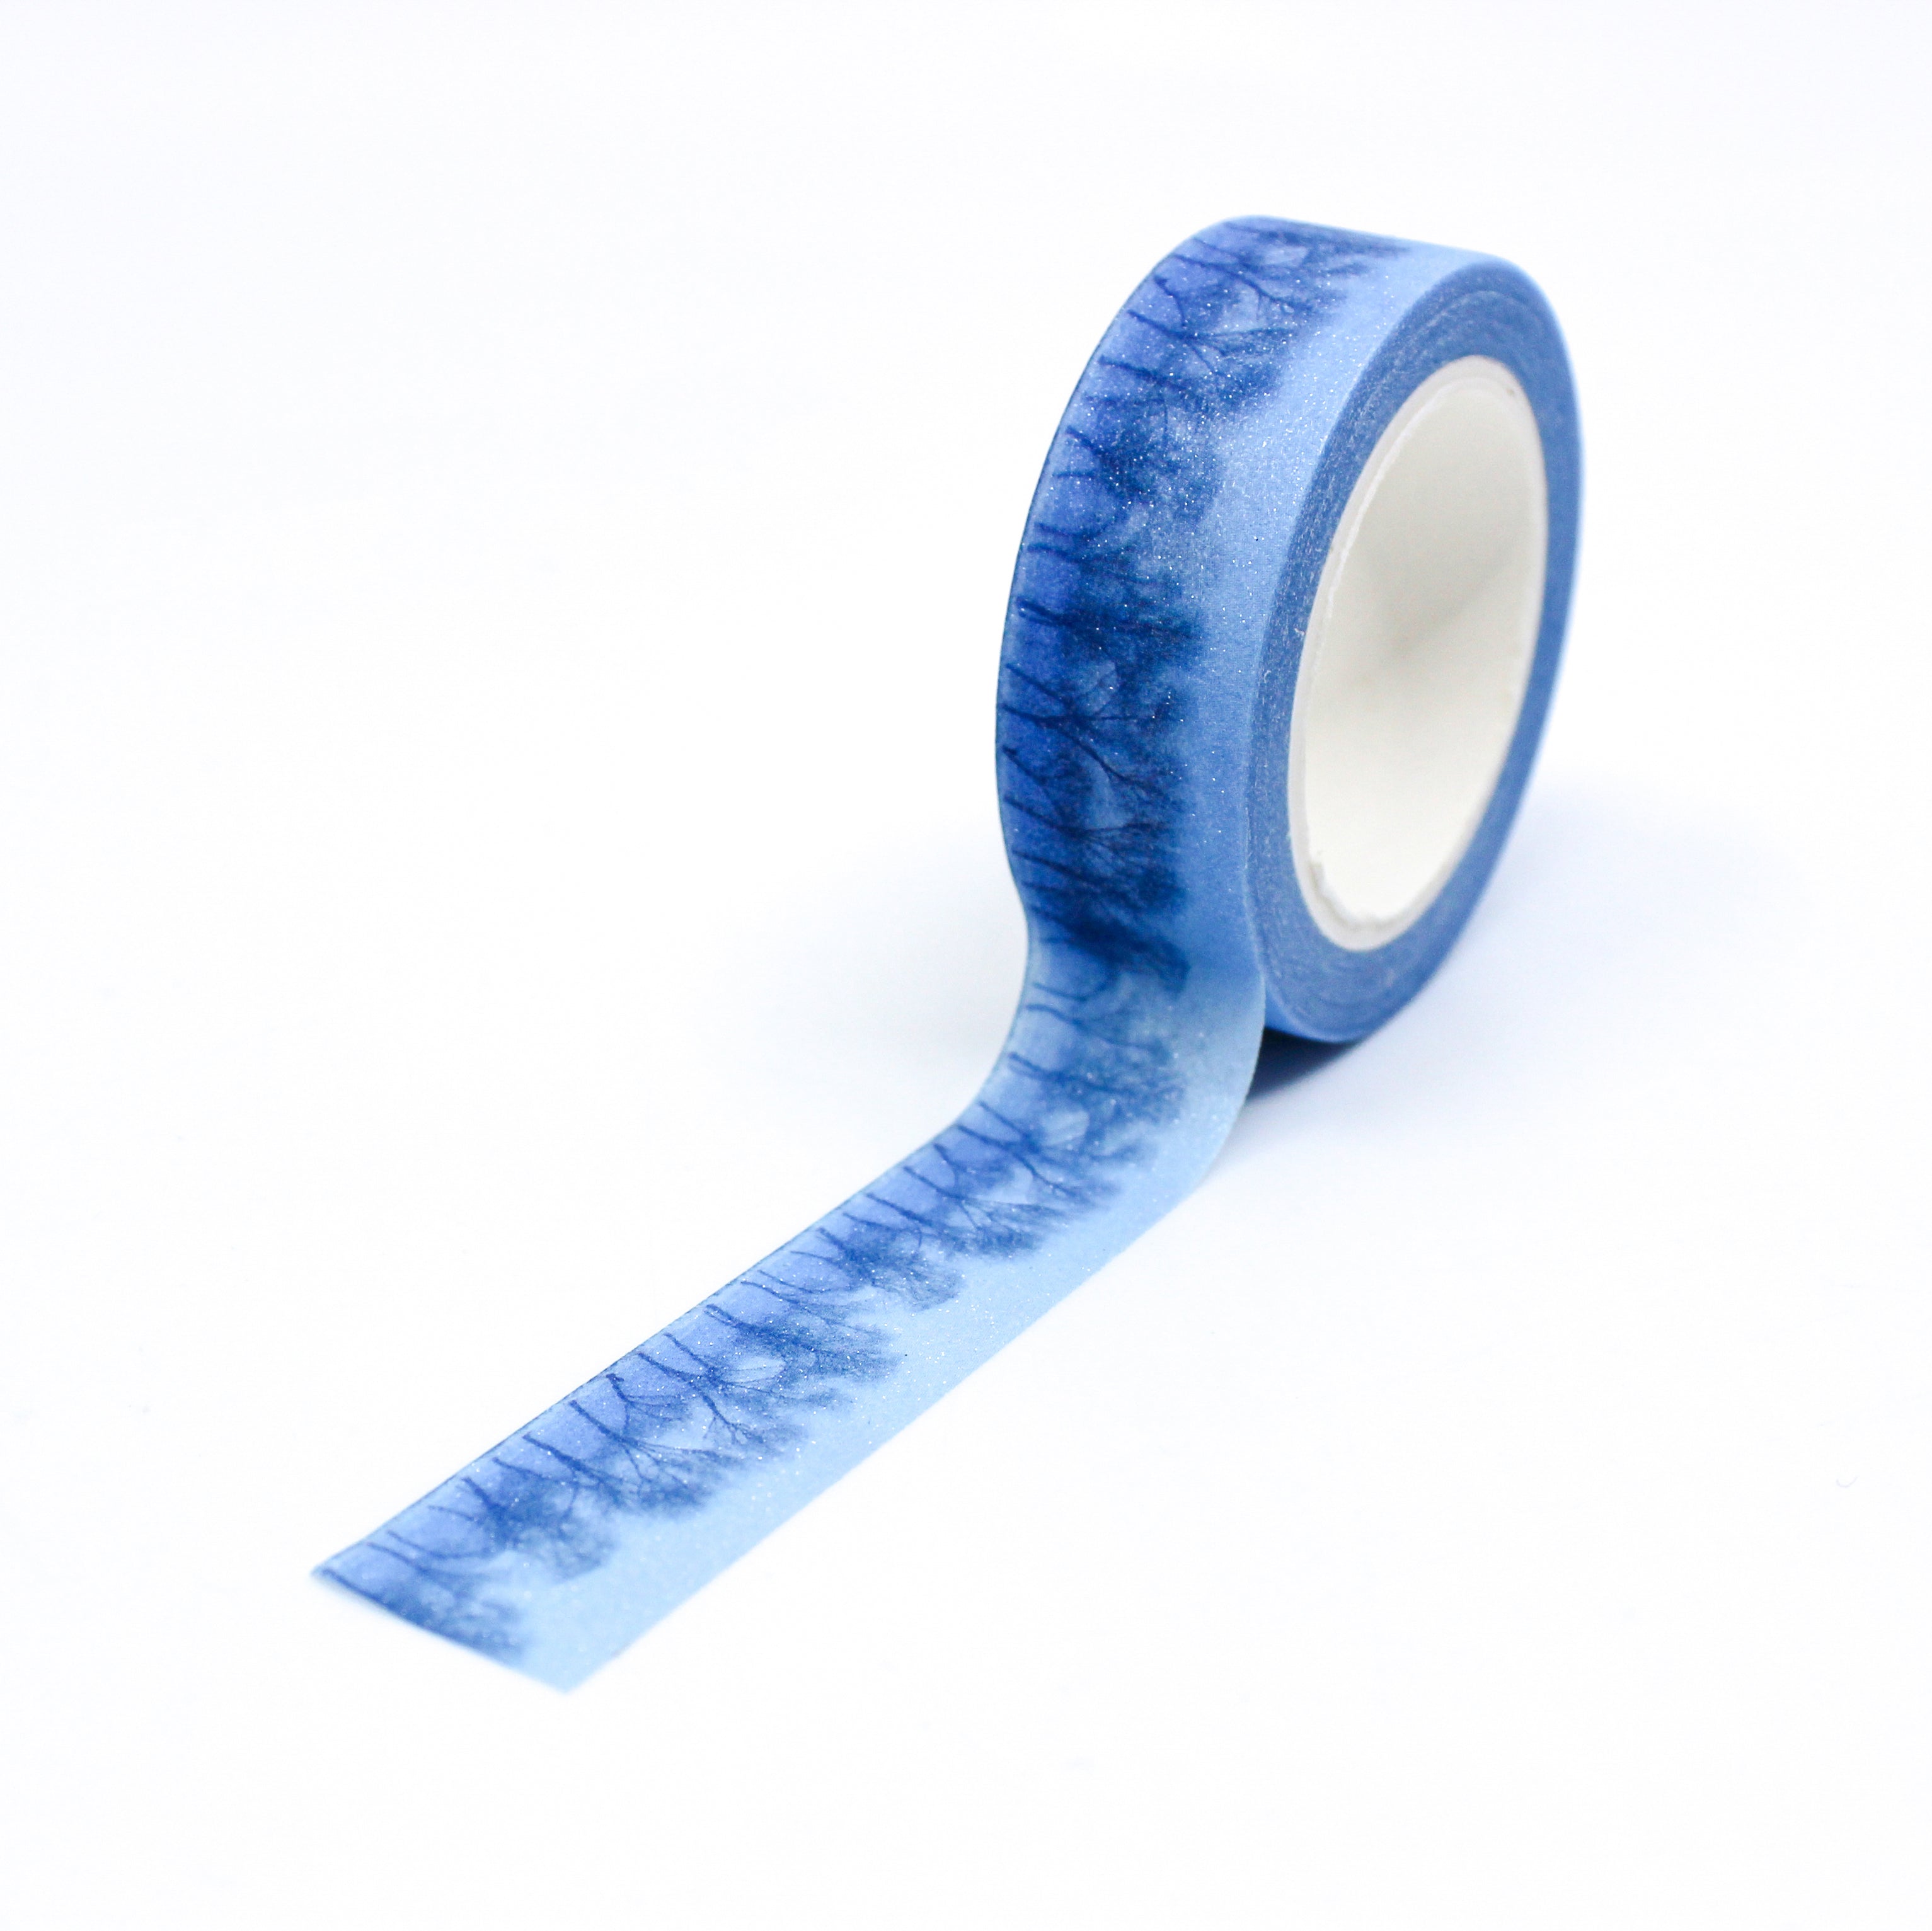 This is a beautiful and moody blue glitter winter tree forest landscape washi tape from BBB Supplies.